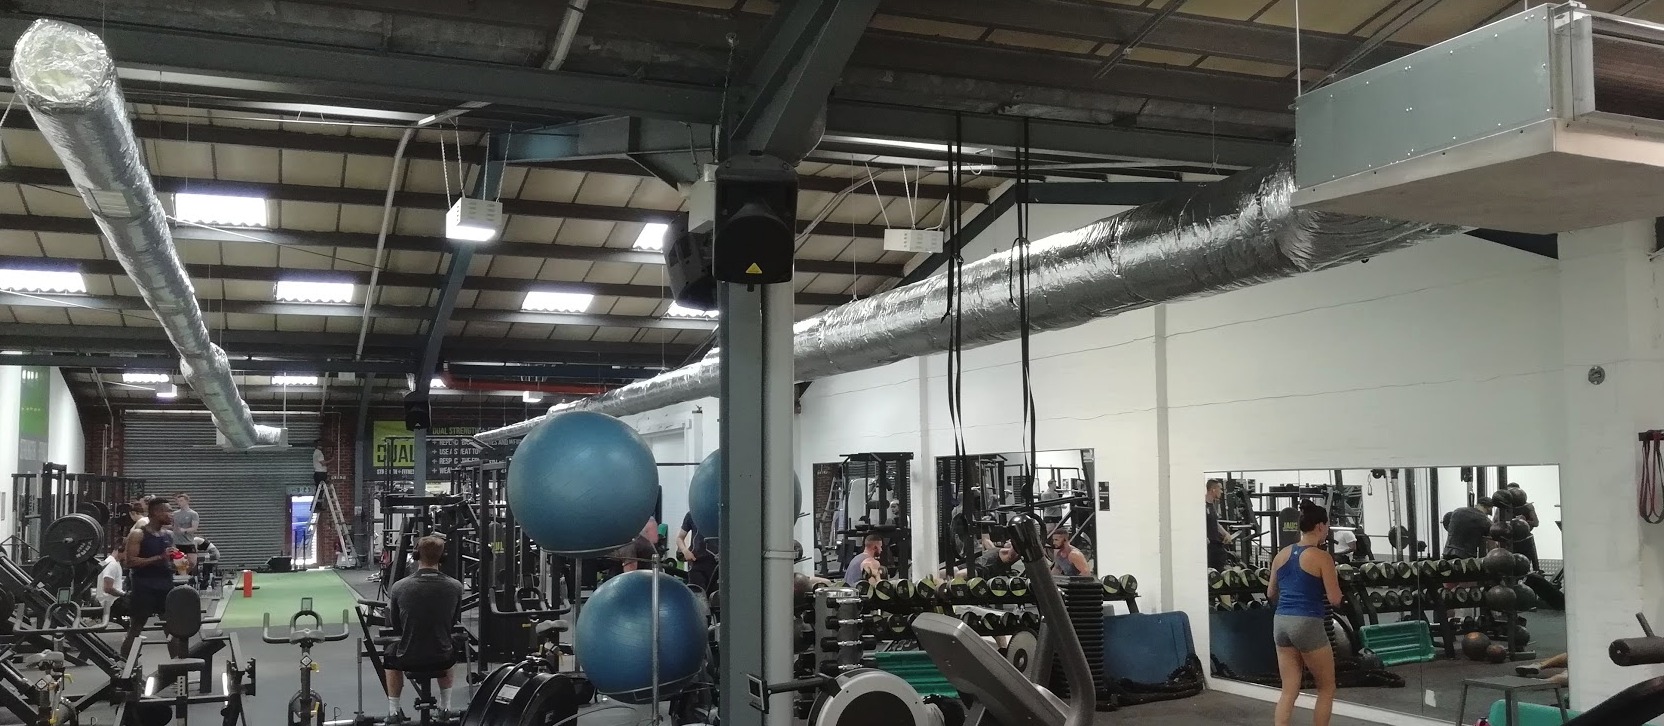 Gym Air Conditioning | Gym Commercial Heating | Gyms & Spas